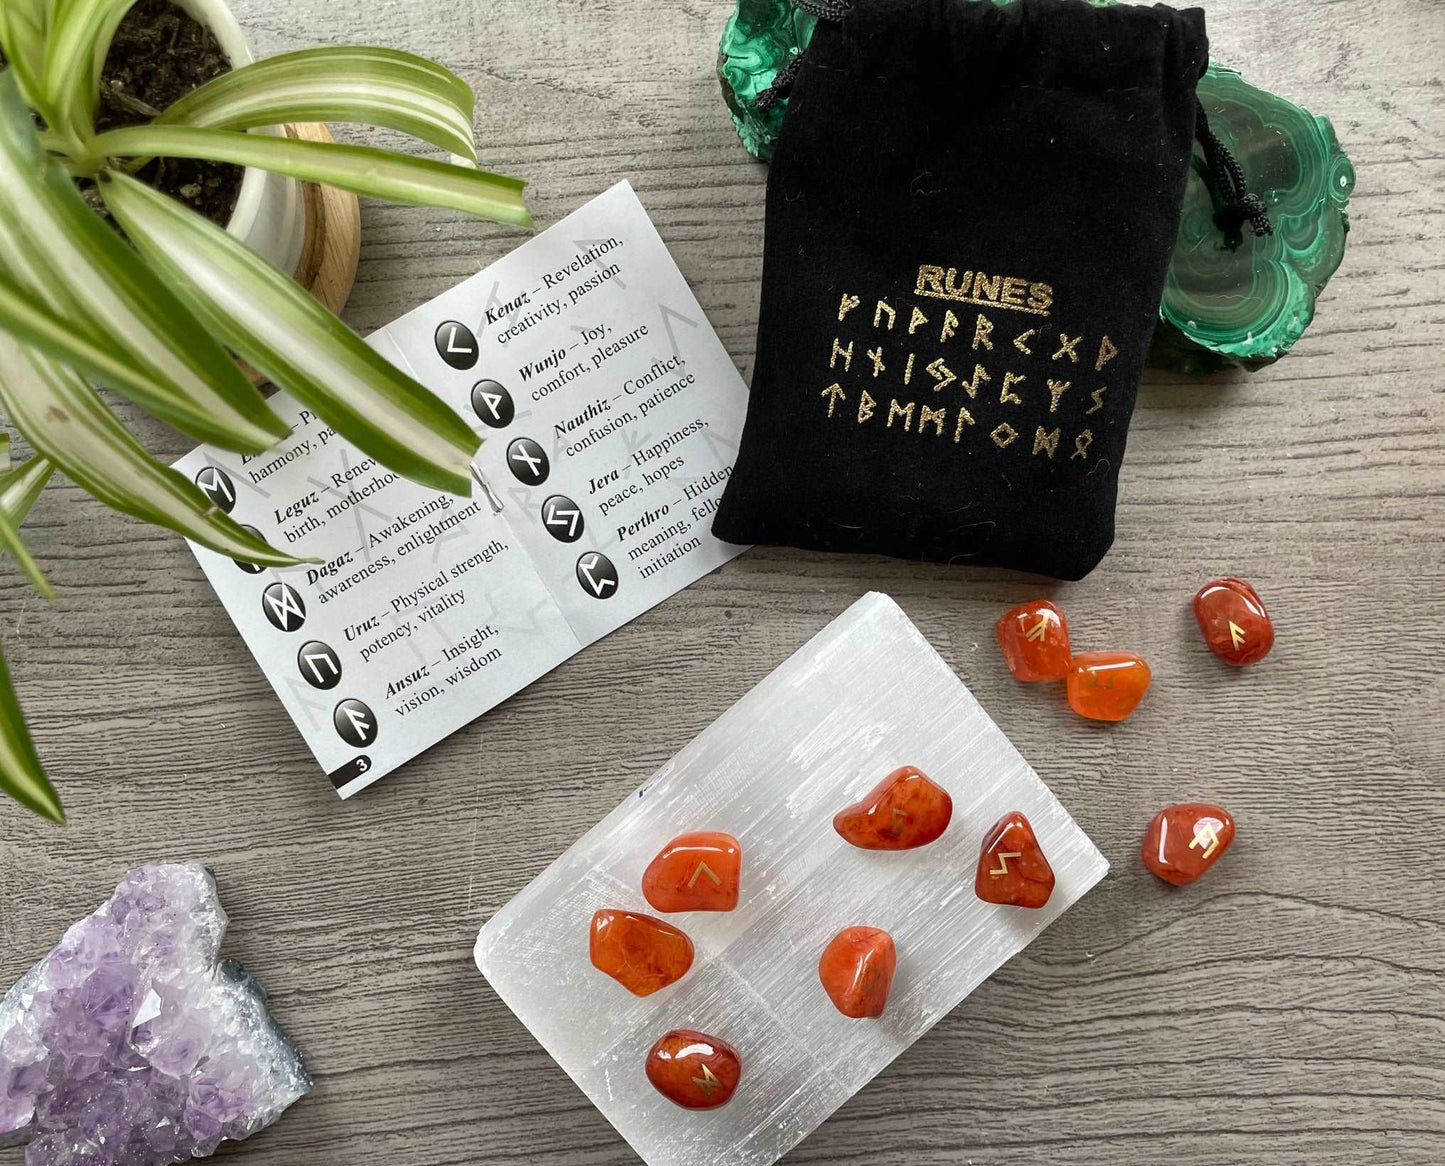 Pictured is a rune set made of carnelian tumbled stones. A black velvet bag and instructions sit nearby,